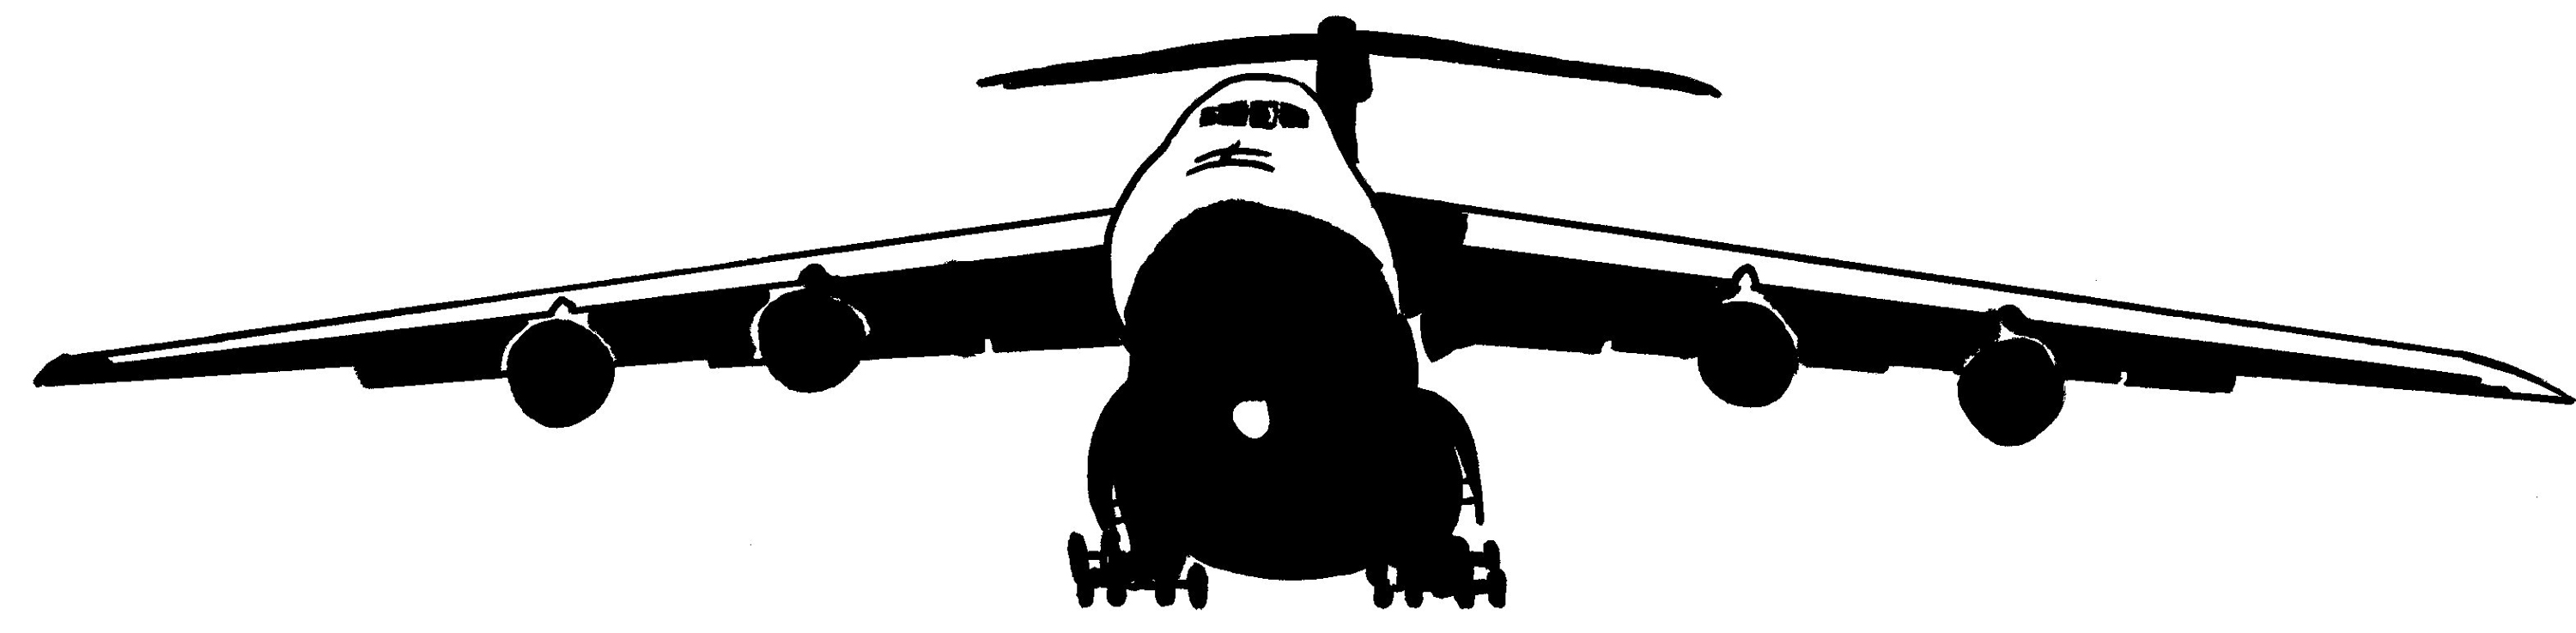 military clip art library - photo #17